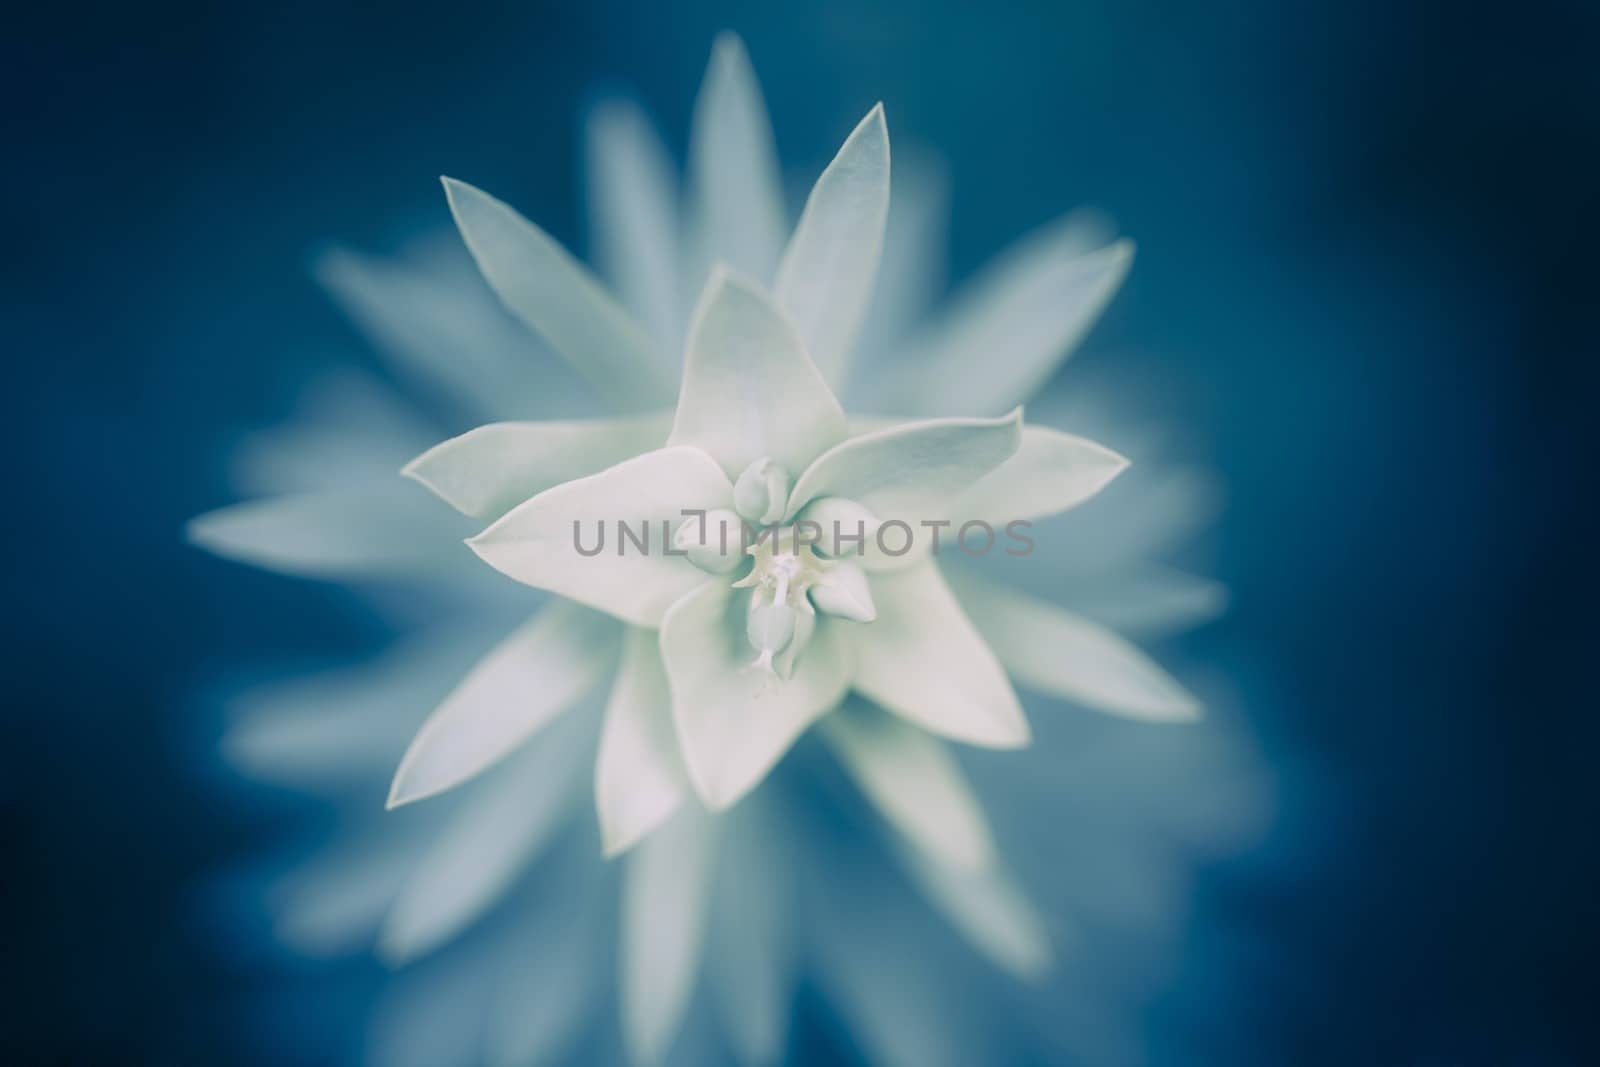 Picture of a star-shaped flower with blue filter